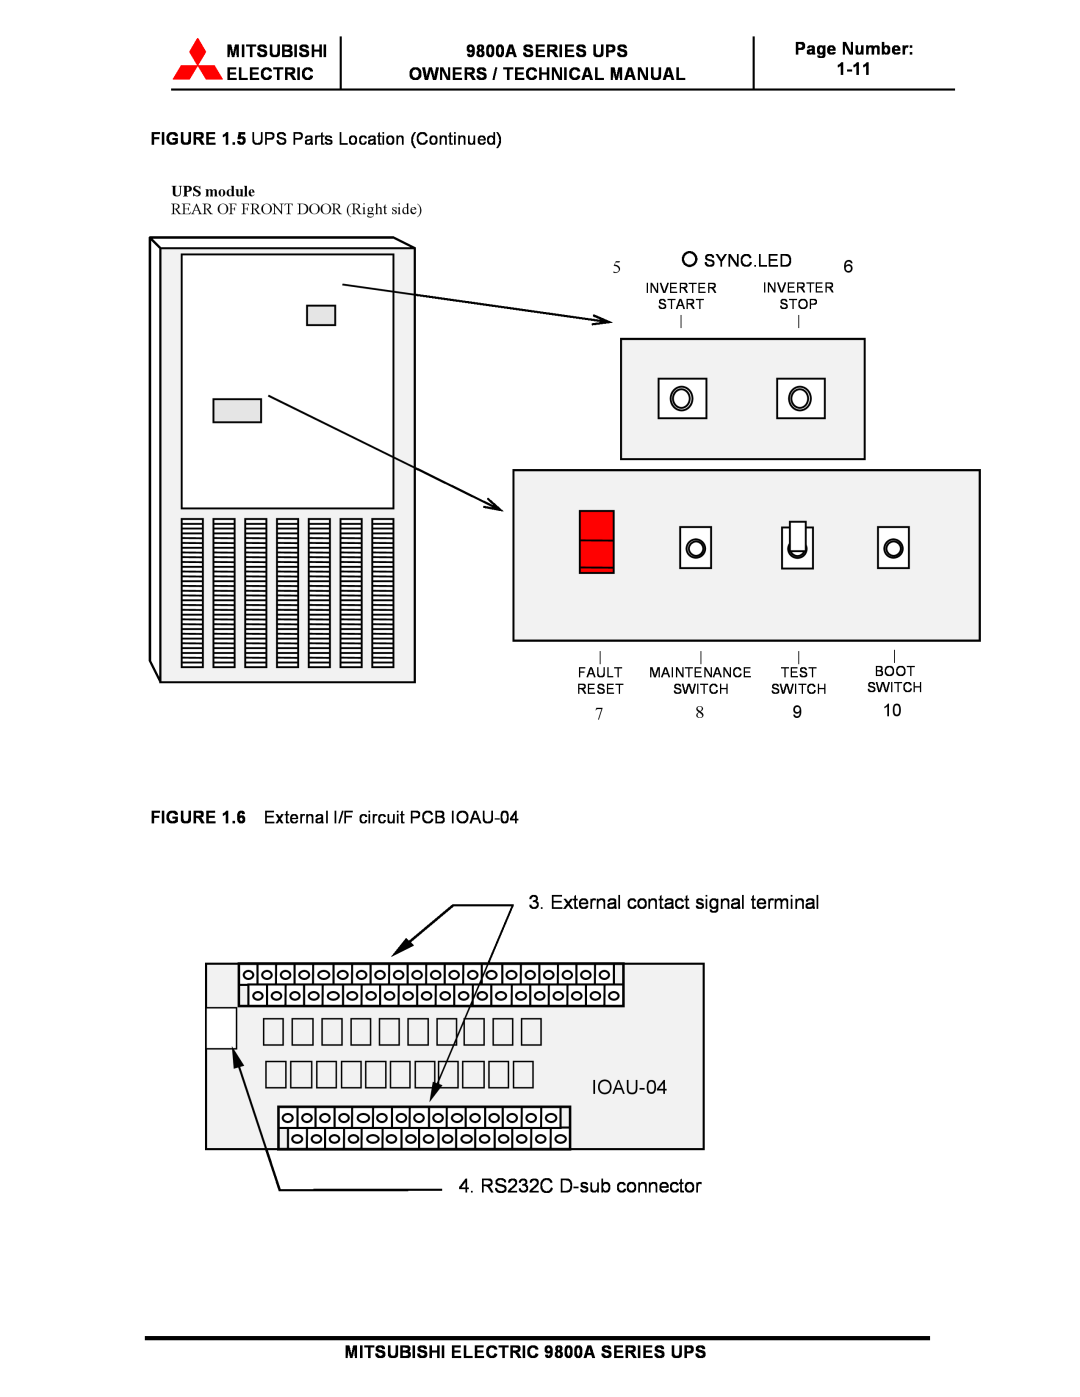 Mitsubishi 9800A Series Mitsubishi Electric, 9800A SERIES UPS OWNERS / TECHNICAL MANUAL, Page Number 1-11, UPS module 